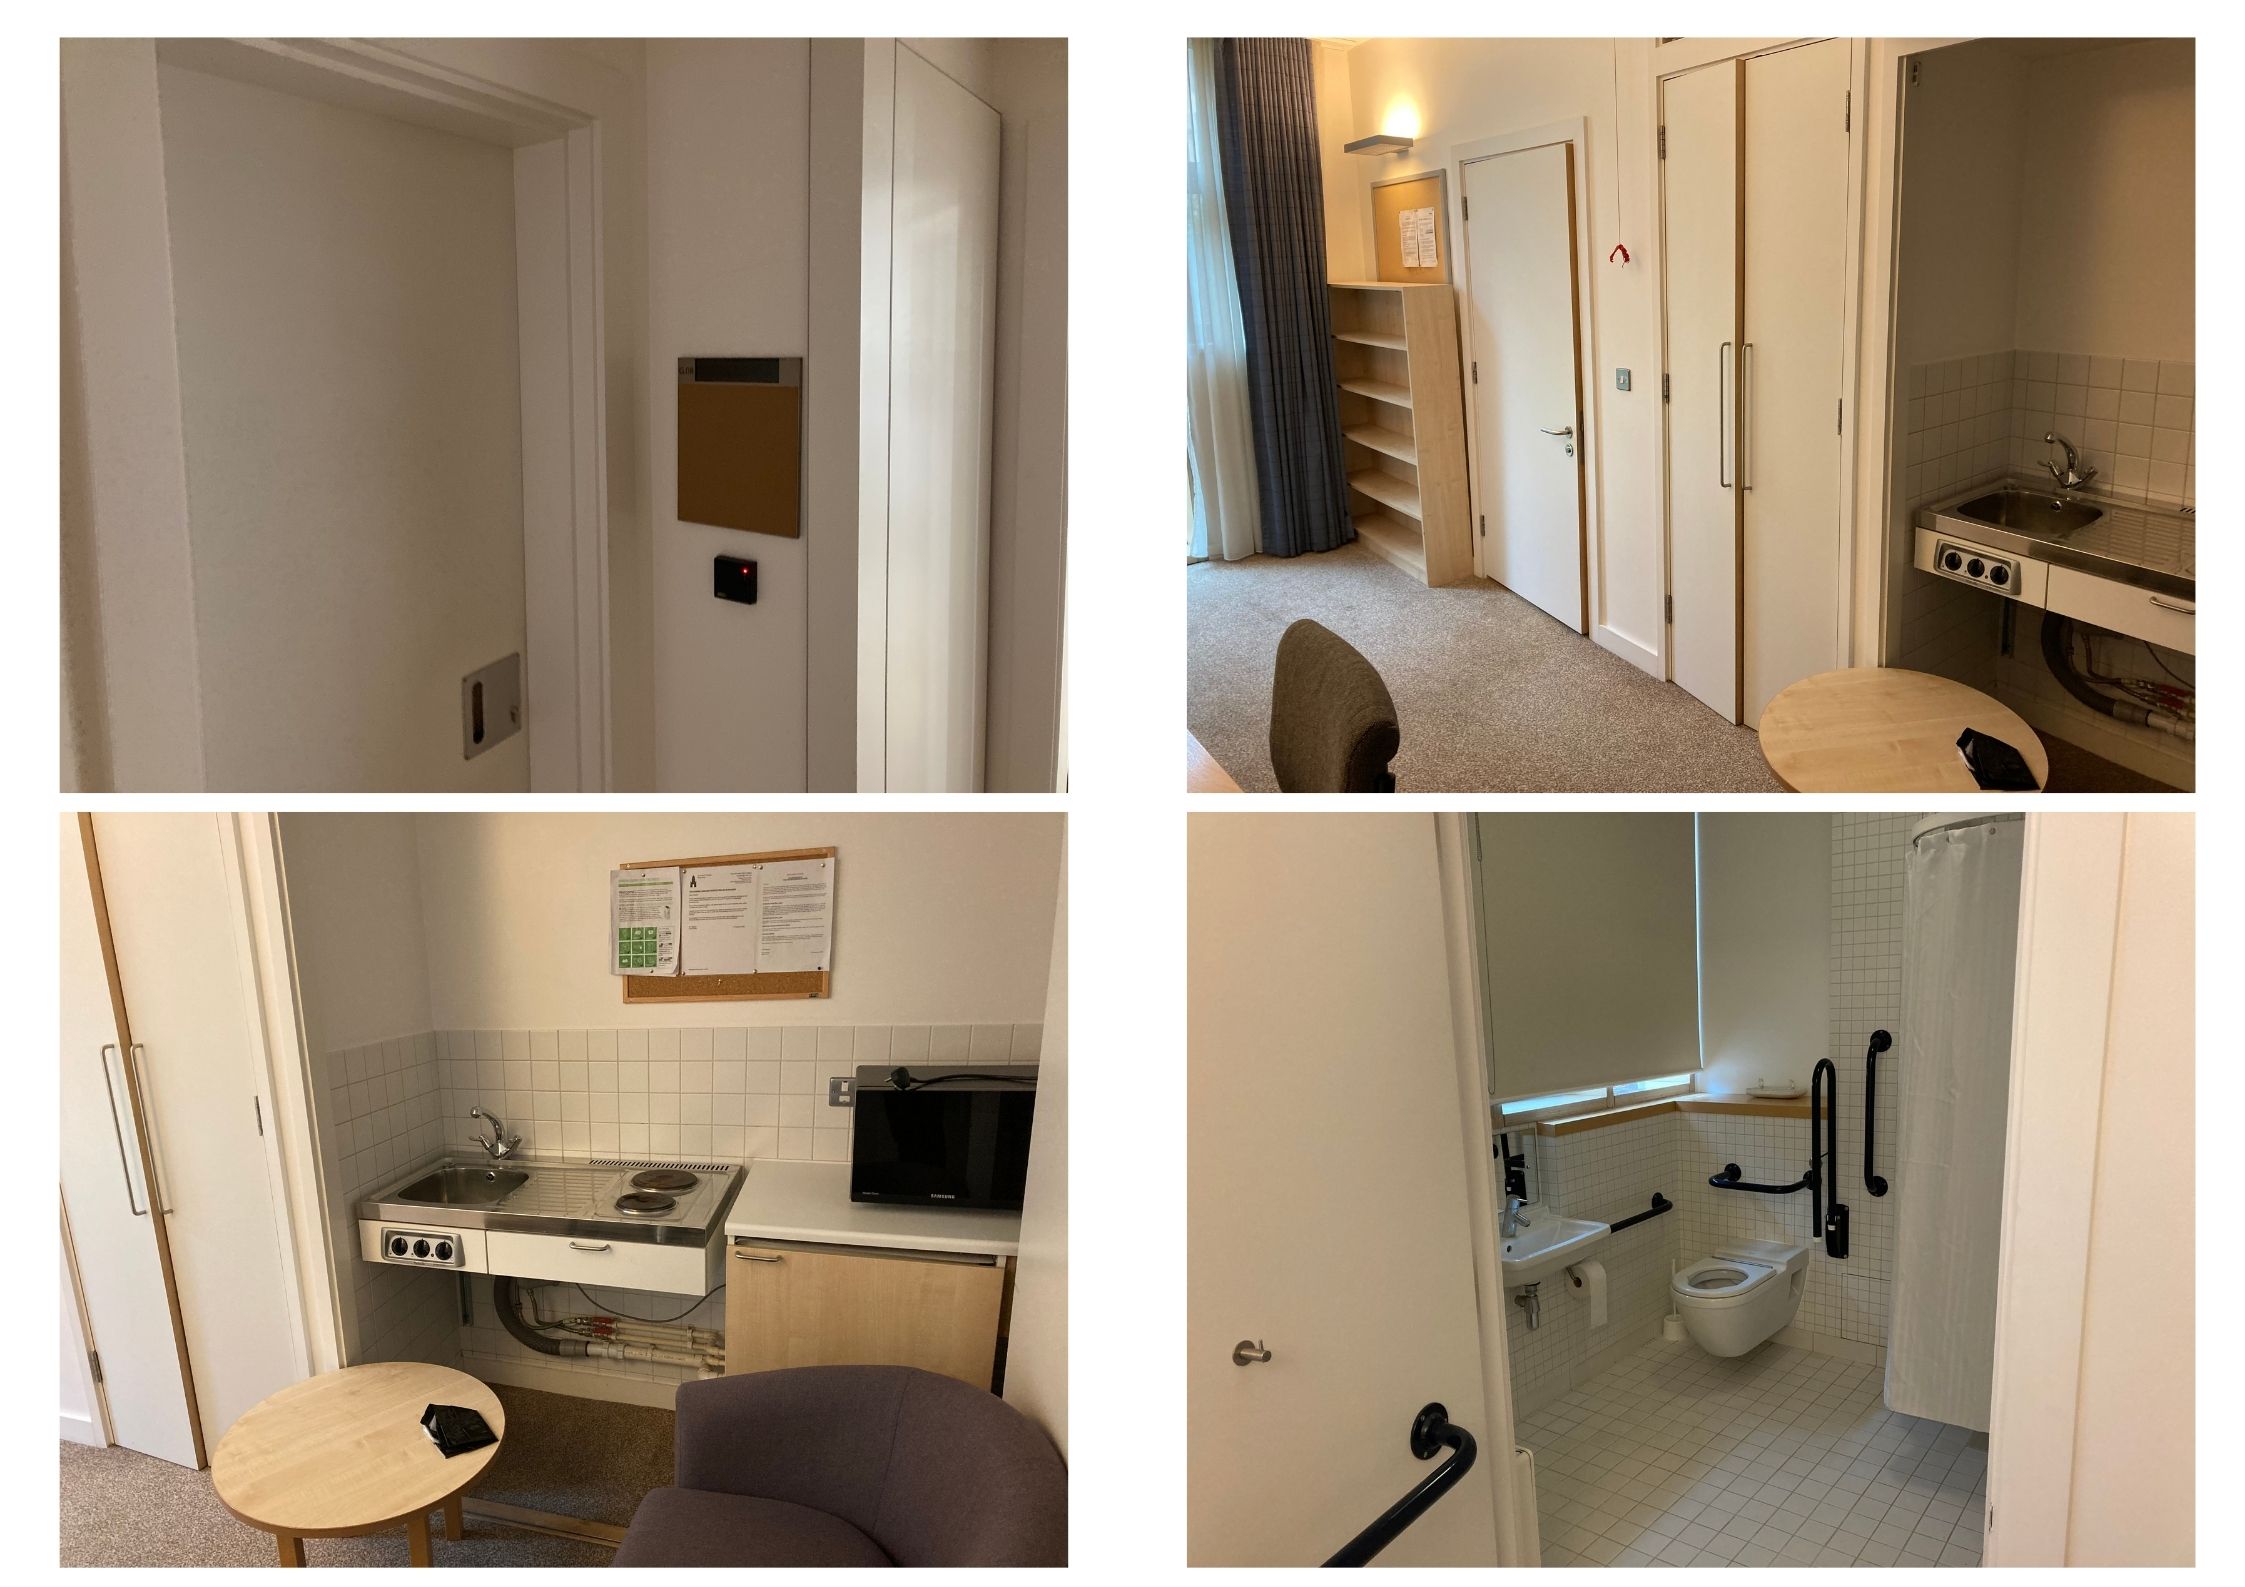 A montage of the accessible room in the Stephen Hawking Building showing the entrance, living space and bathroom